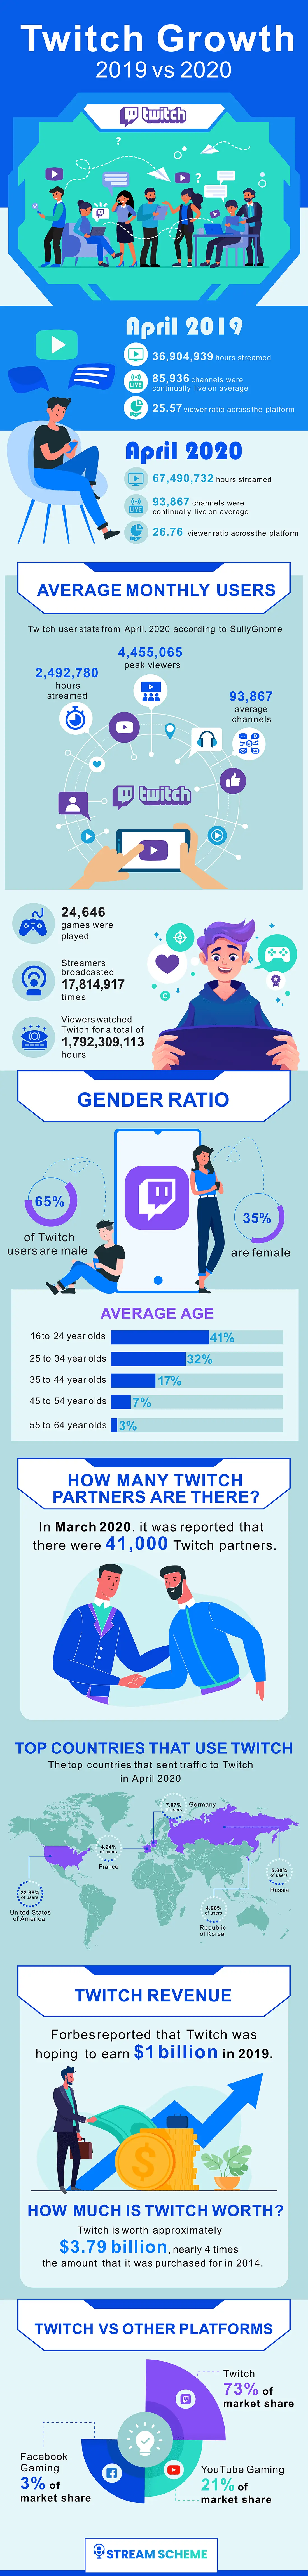 Infographic of Twitch growth in 2020 covering average monthly users, gender ratio, number of Twitch Partners, top counties that use Twitch, Twitch revenue, Twitch vs other platforms